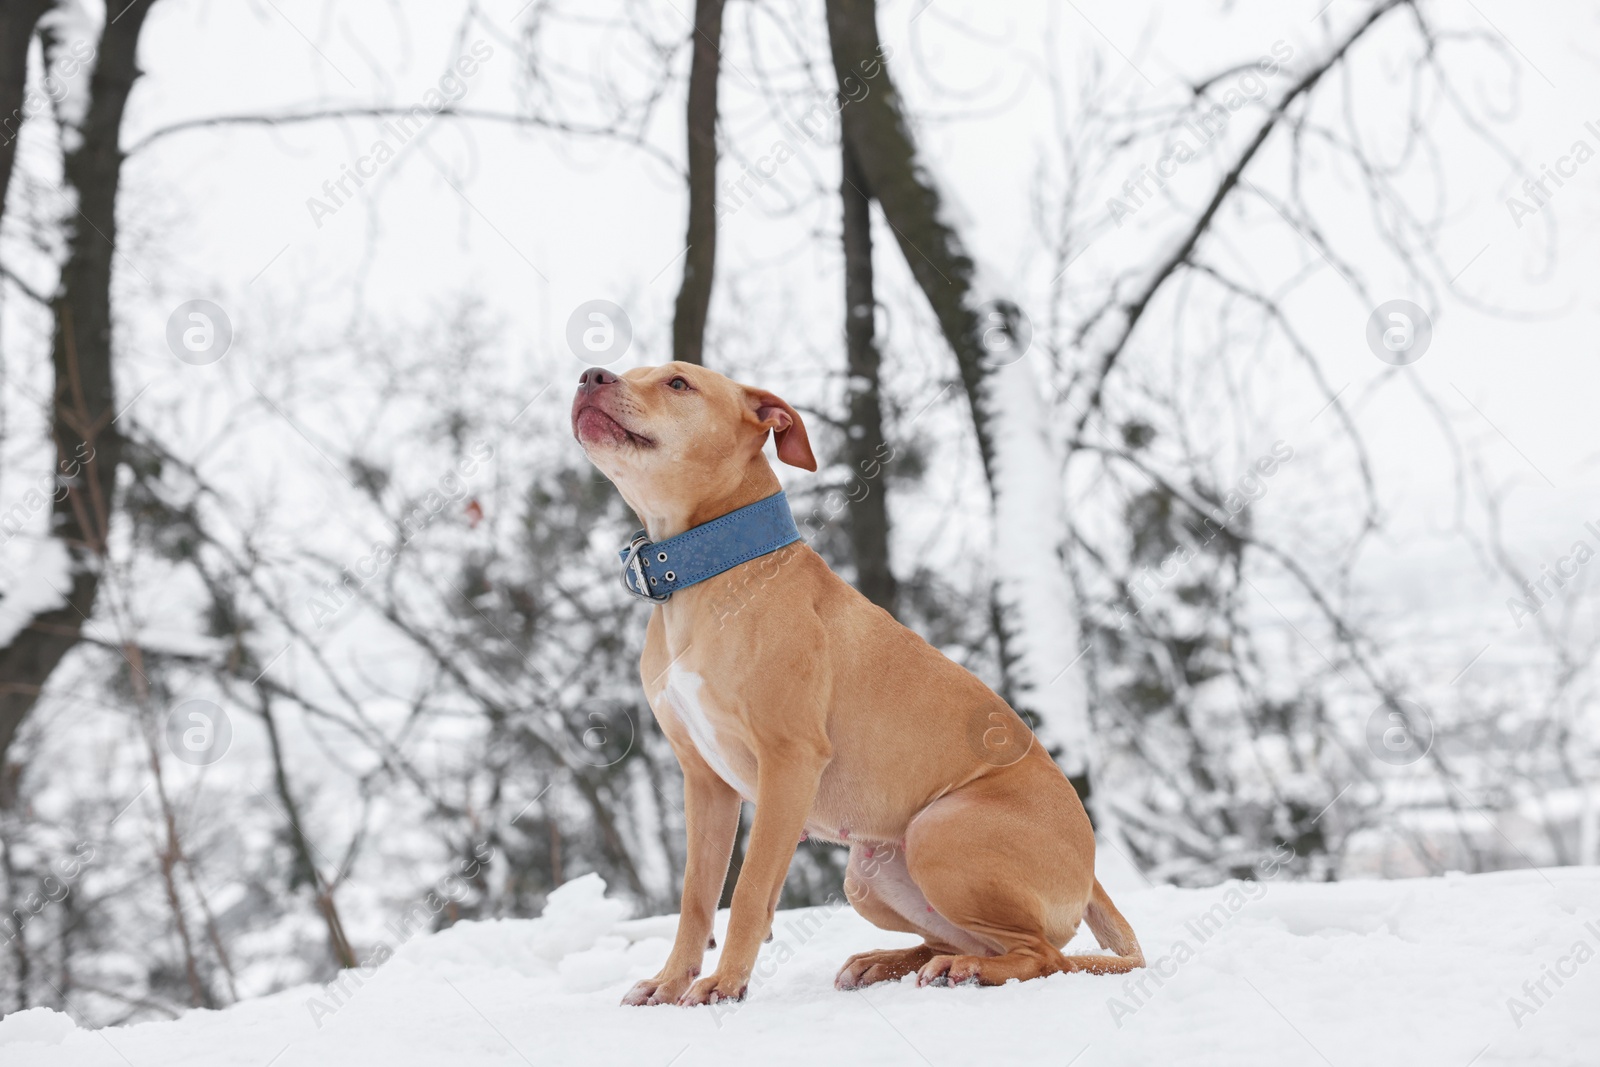 Photo of Cute ginger dog sitting in snowy forest